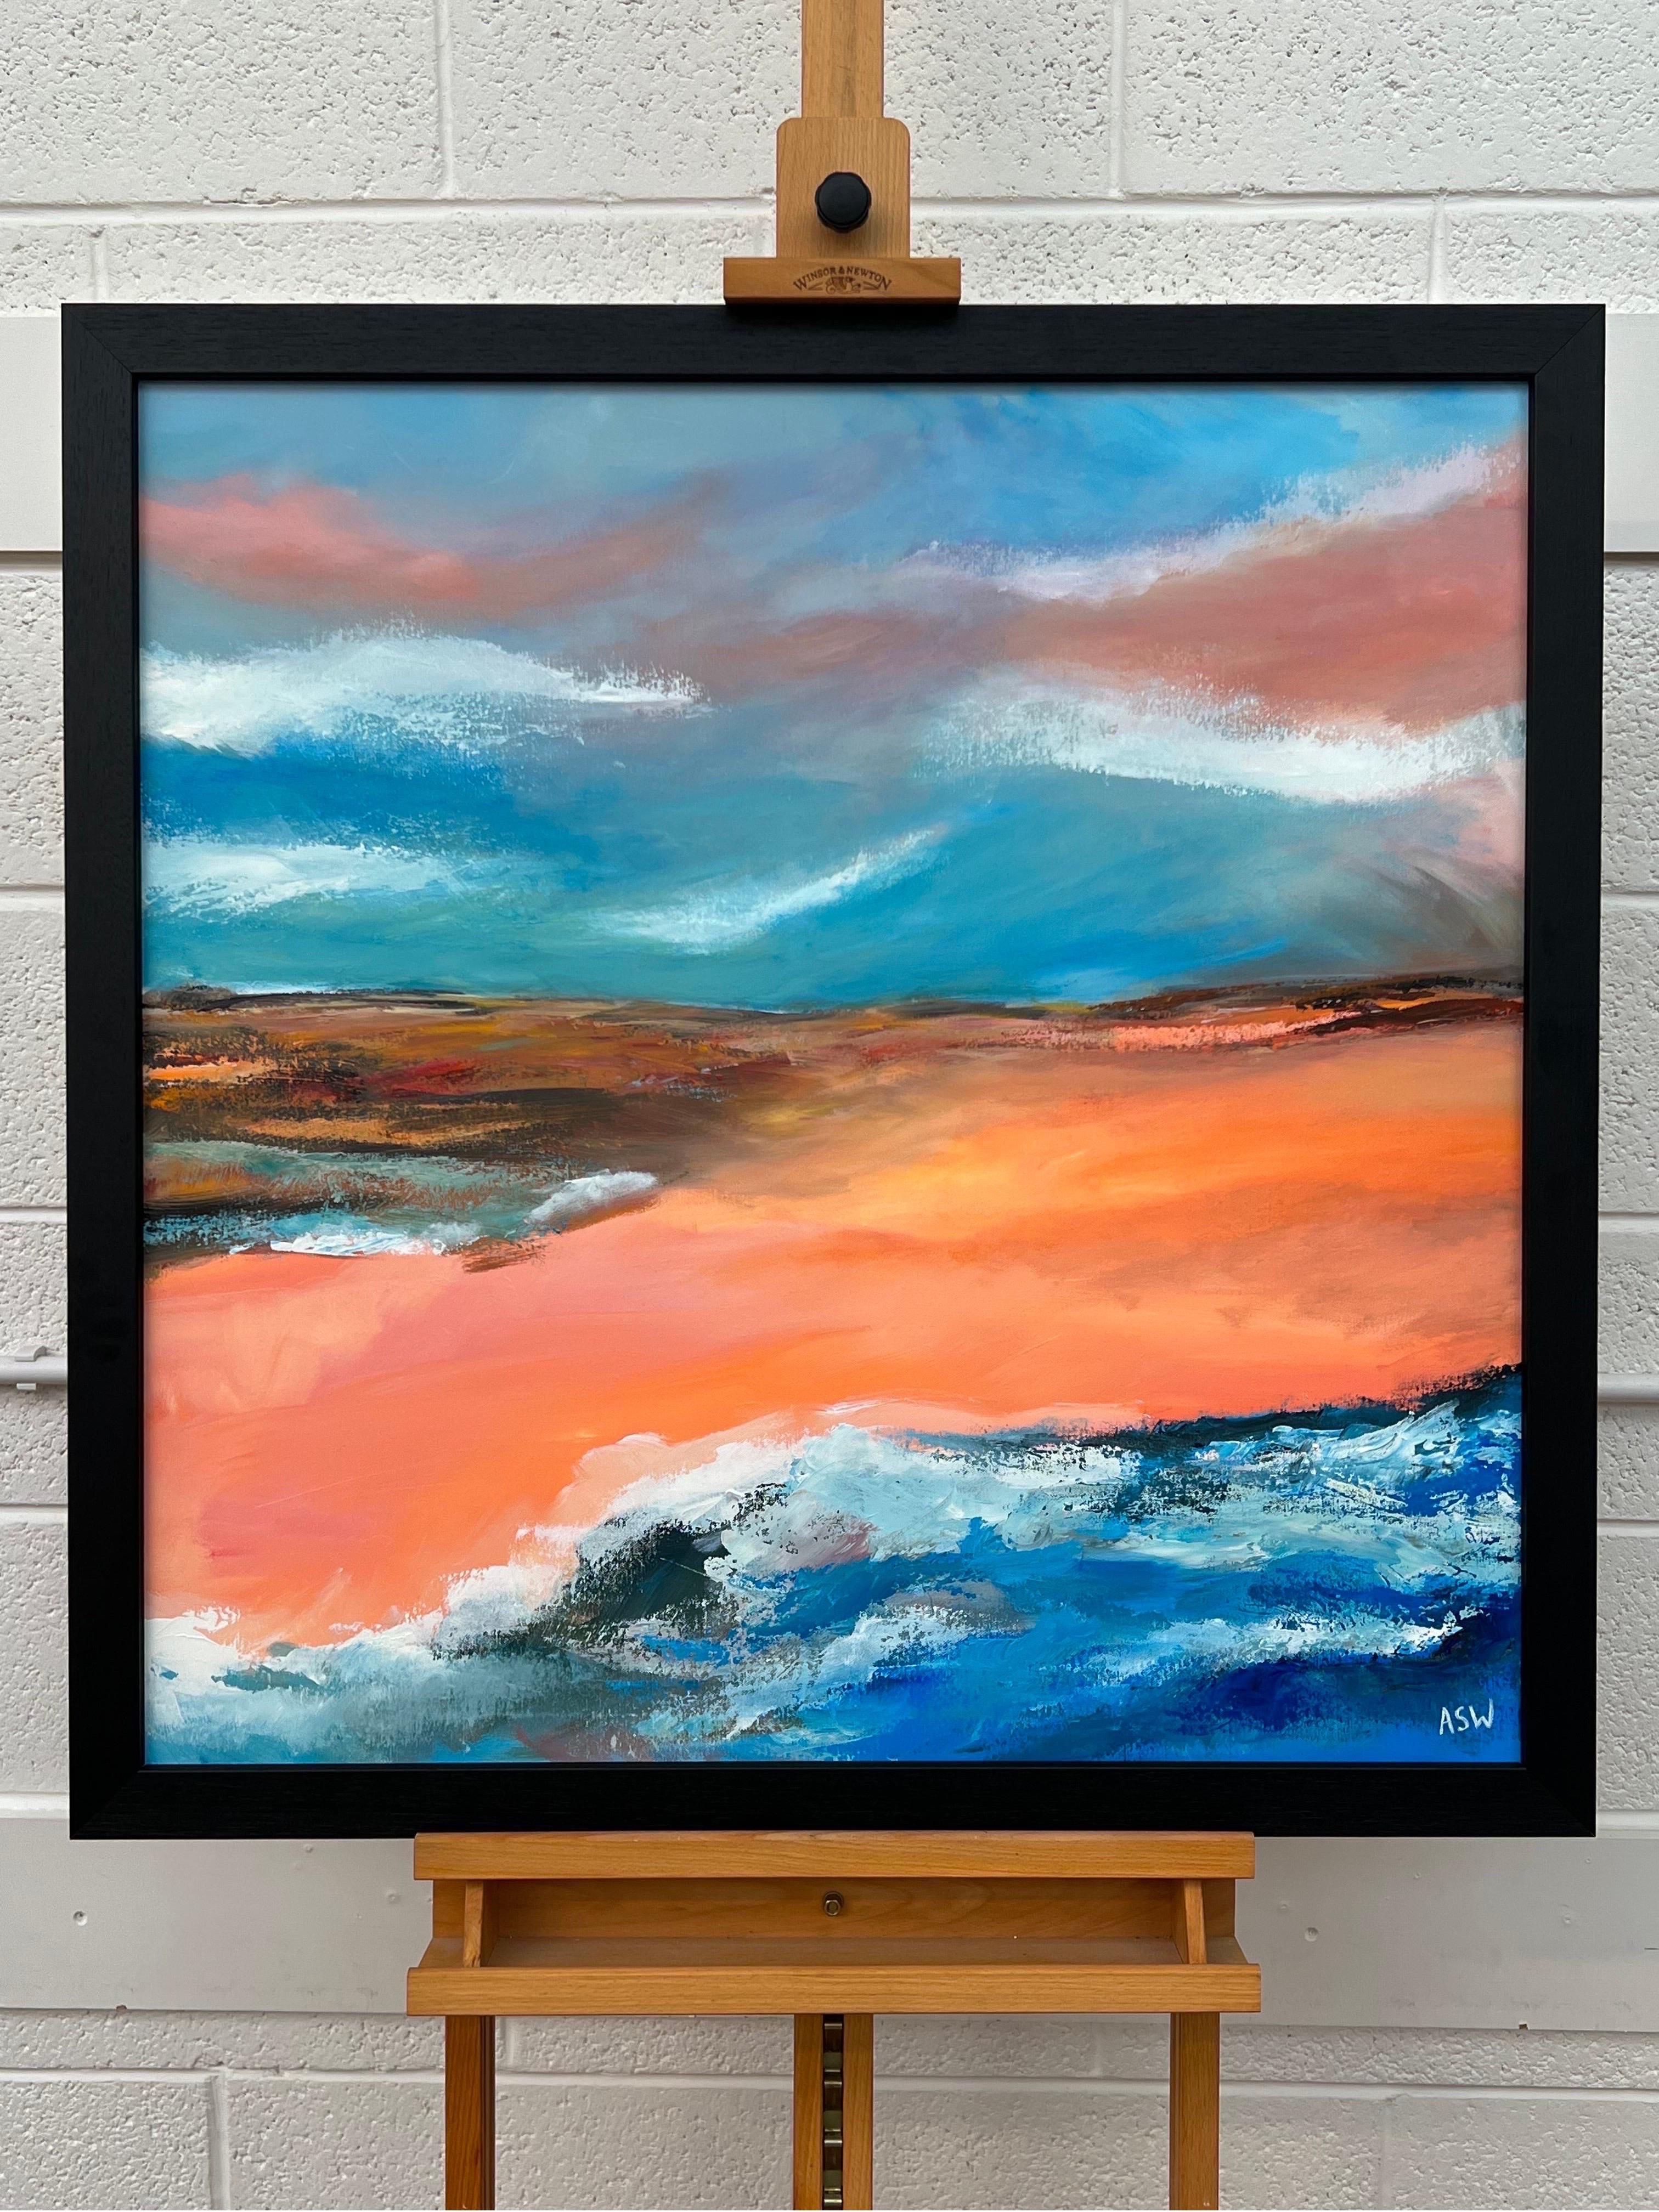 Abstract English Moorland Landscape using Earthy Colours by Contemporary British Artist Angela Wakefield

Art measures 30 x 30 inches
Frame measures 33 x 33 inches

Angela Wakefield has twice been on the front cover of ‘Art of England’ and featured